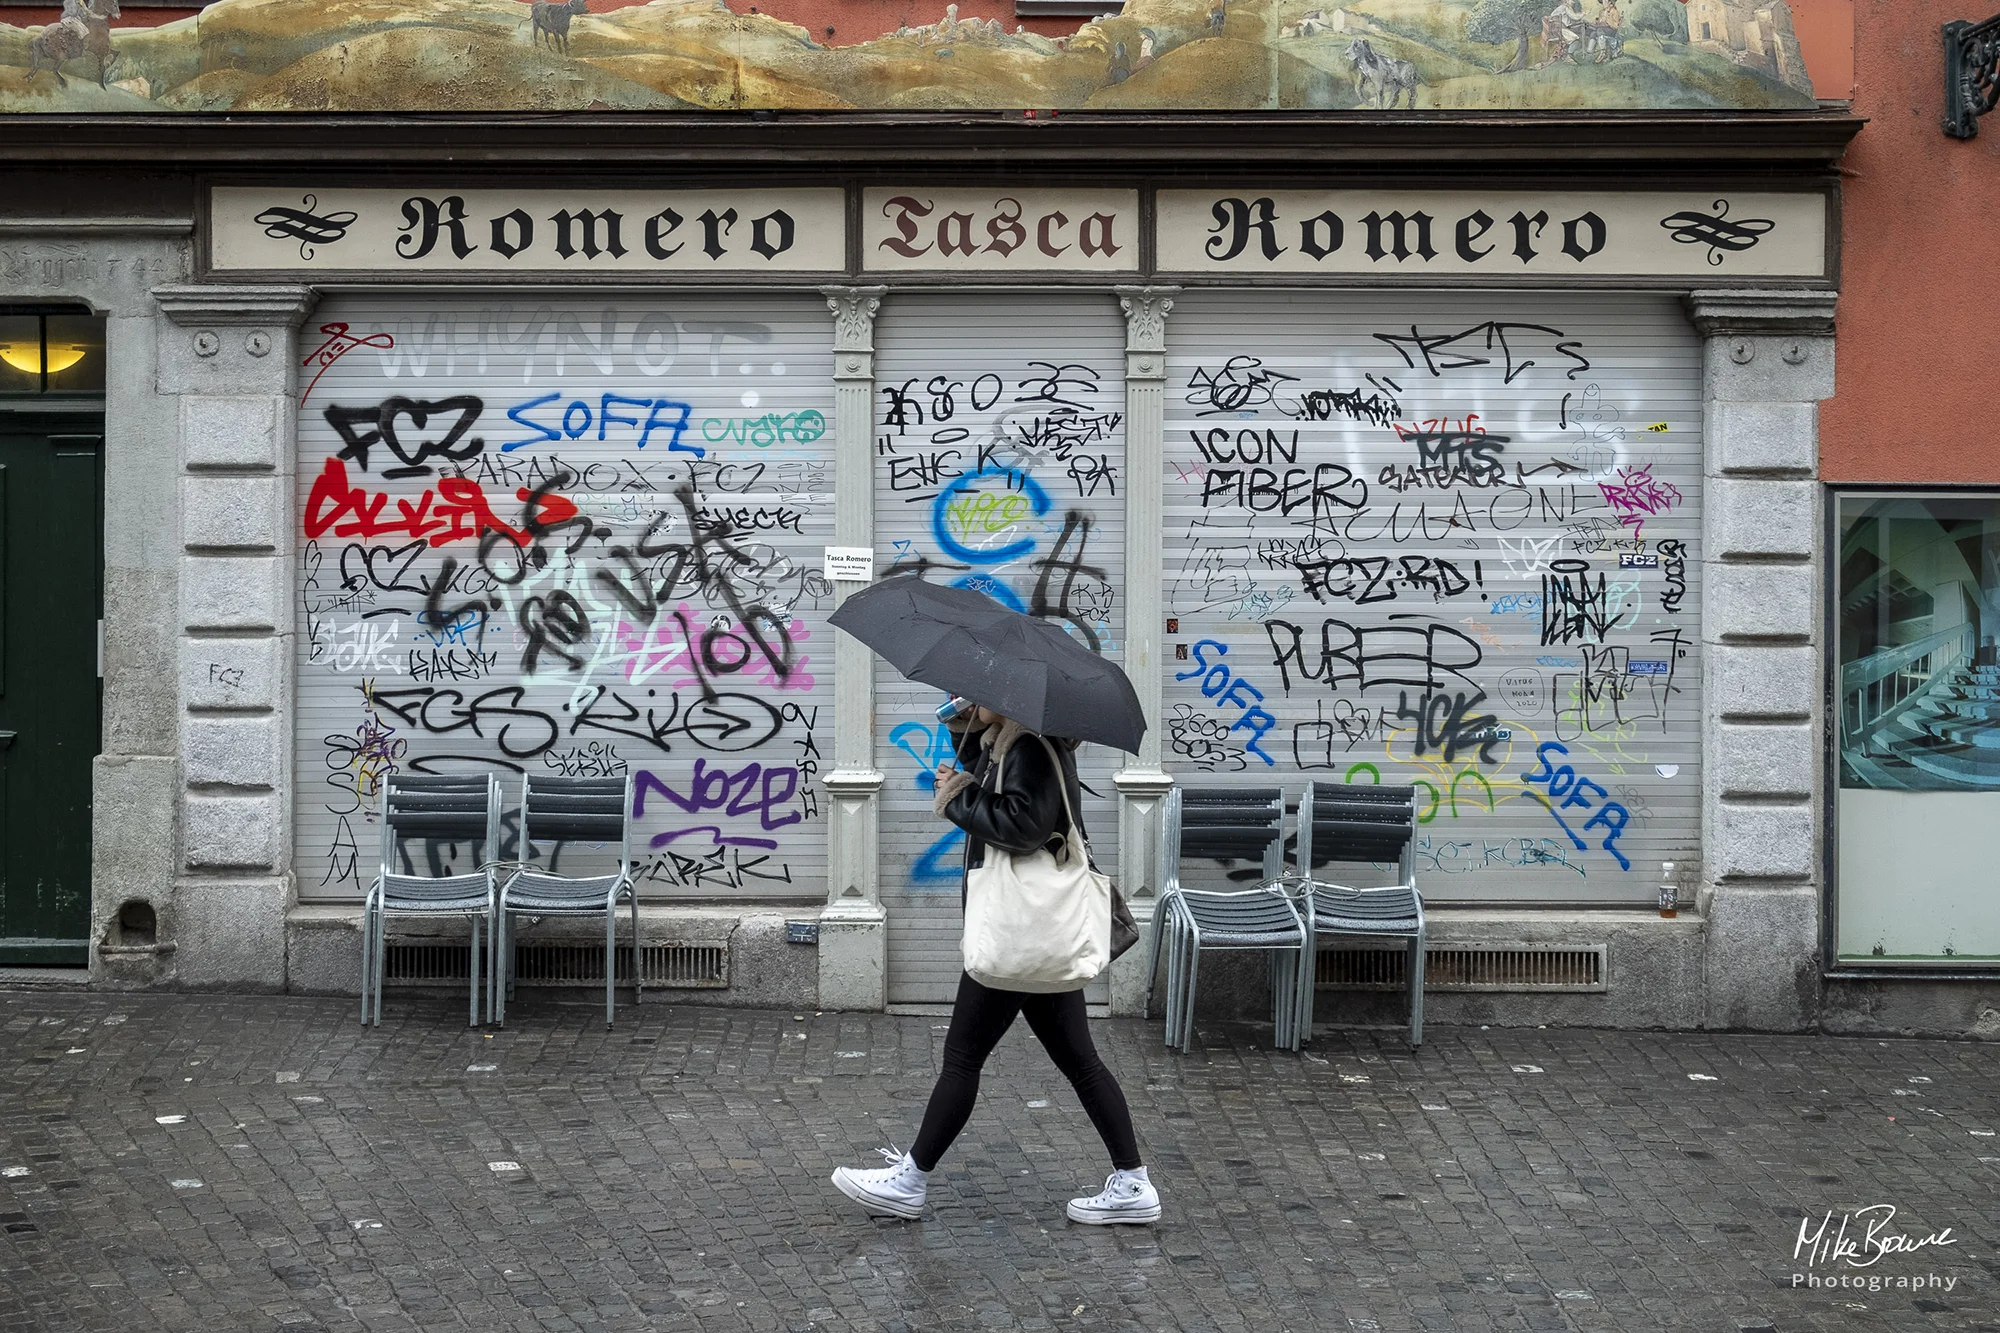 Woman with umbrella and shoulder bag walking past graffiti in Zurich